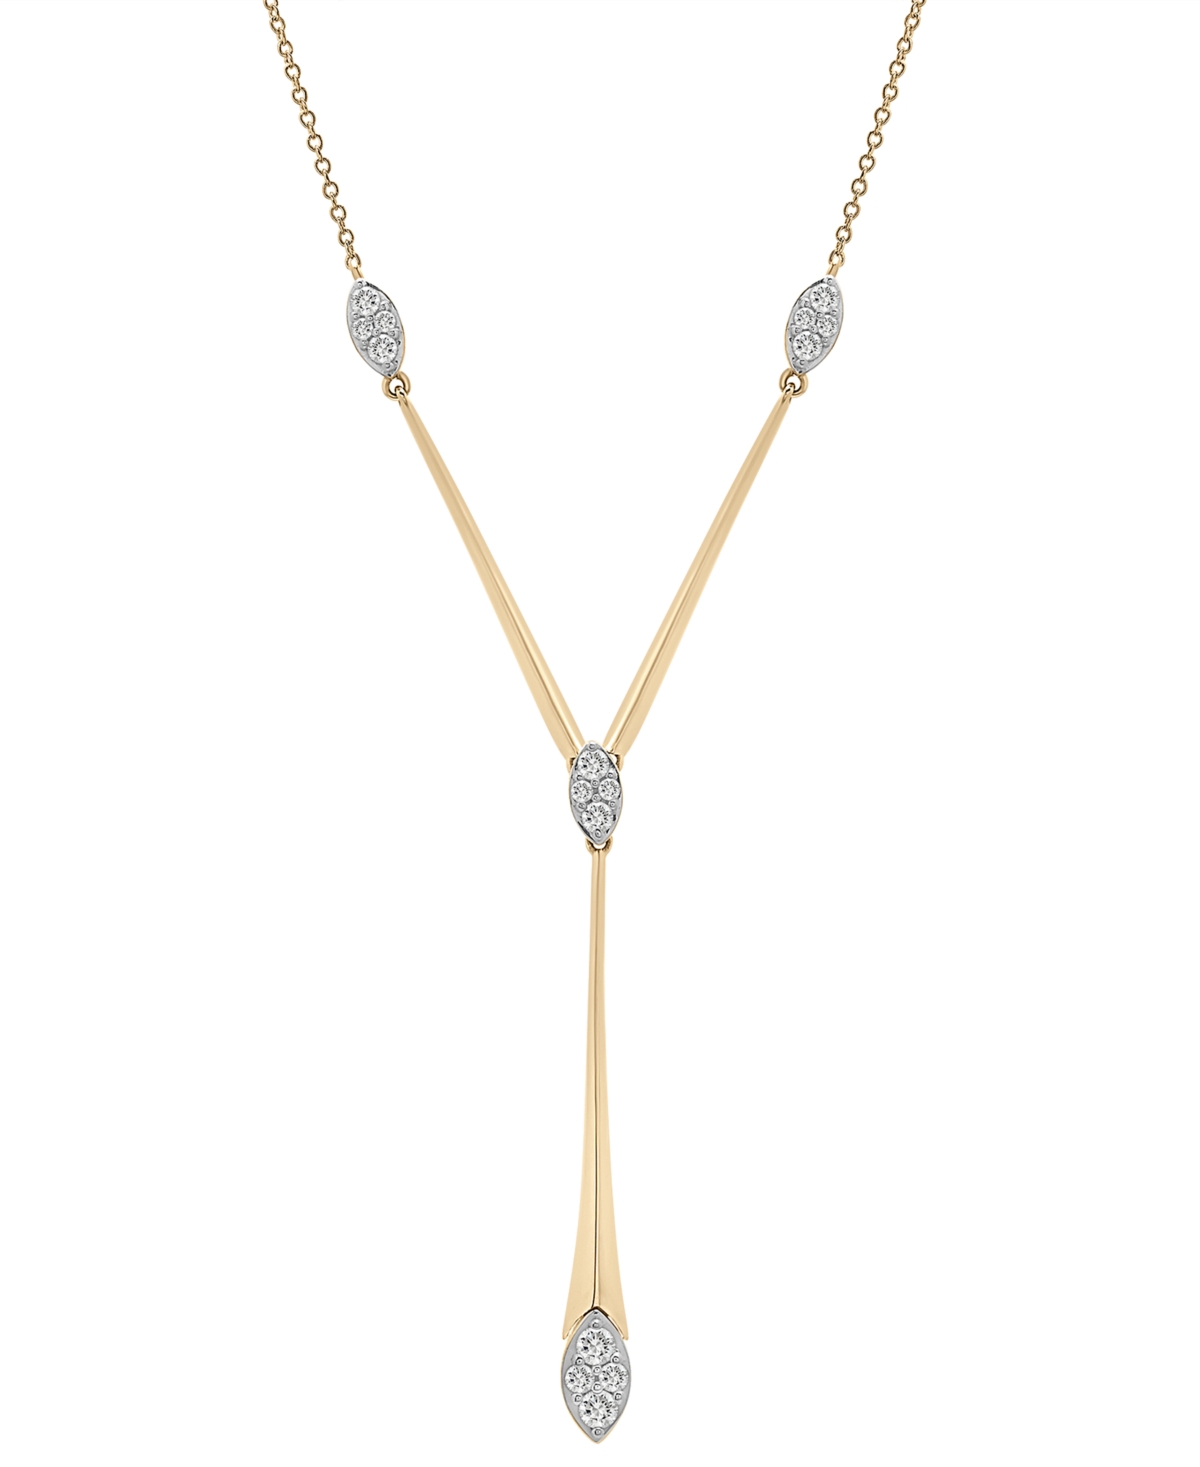 Diamond Cluster Elongated Lariat Necklace (1/2 ct. t.w.) in 14k Gold, 16" + 2" extender, Created for Macy's - Yellow Gold